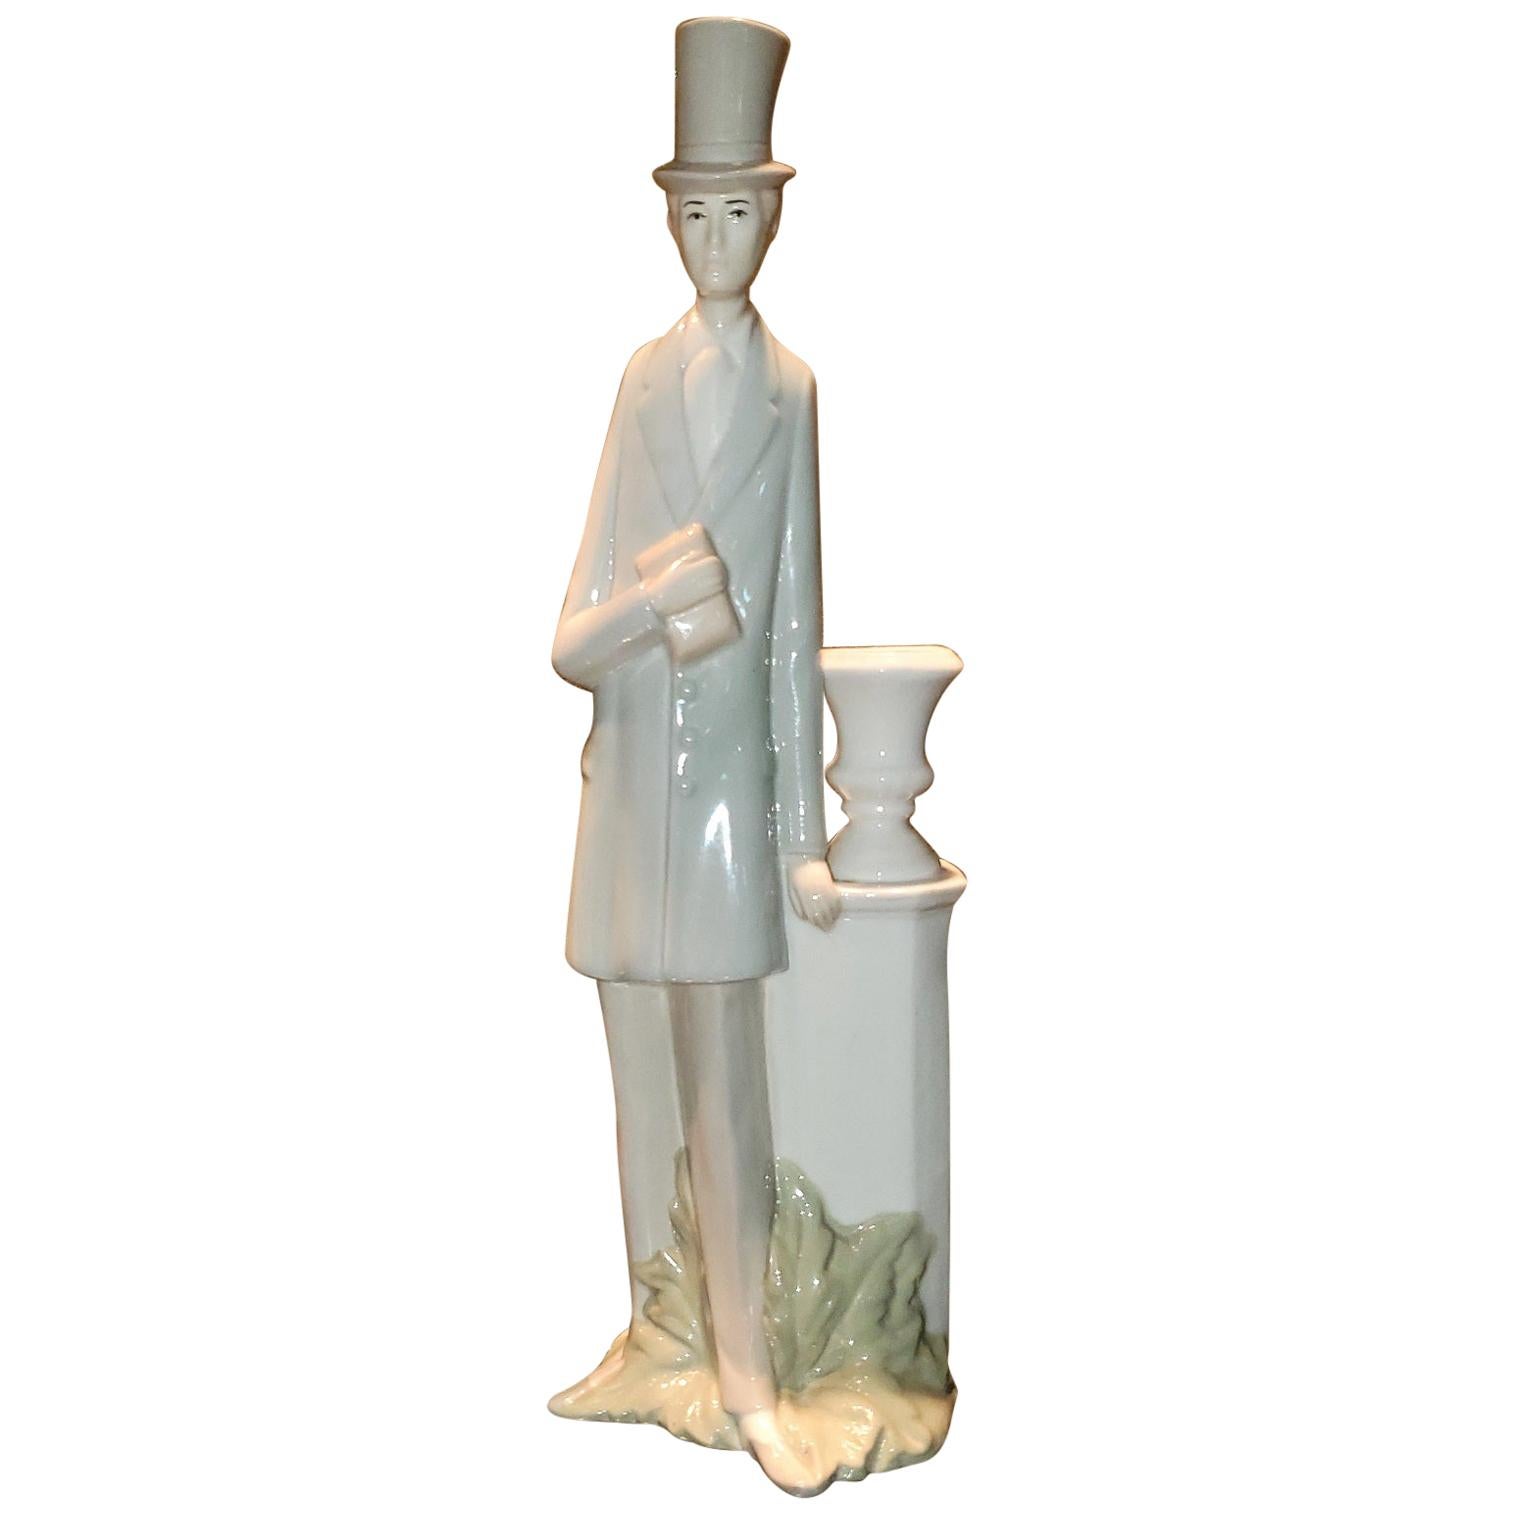 Figurine by Porcelanas Miguel Requena of Gentleman with Candlestick Jardinière